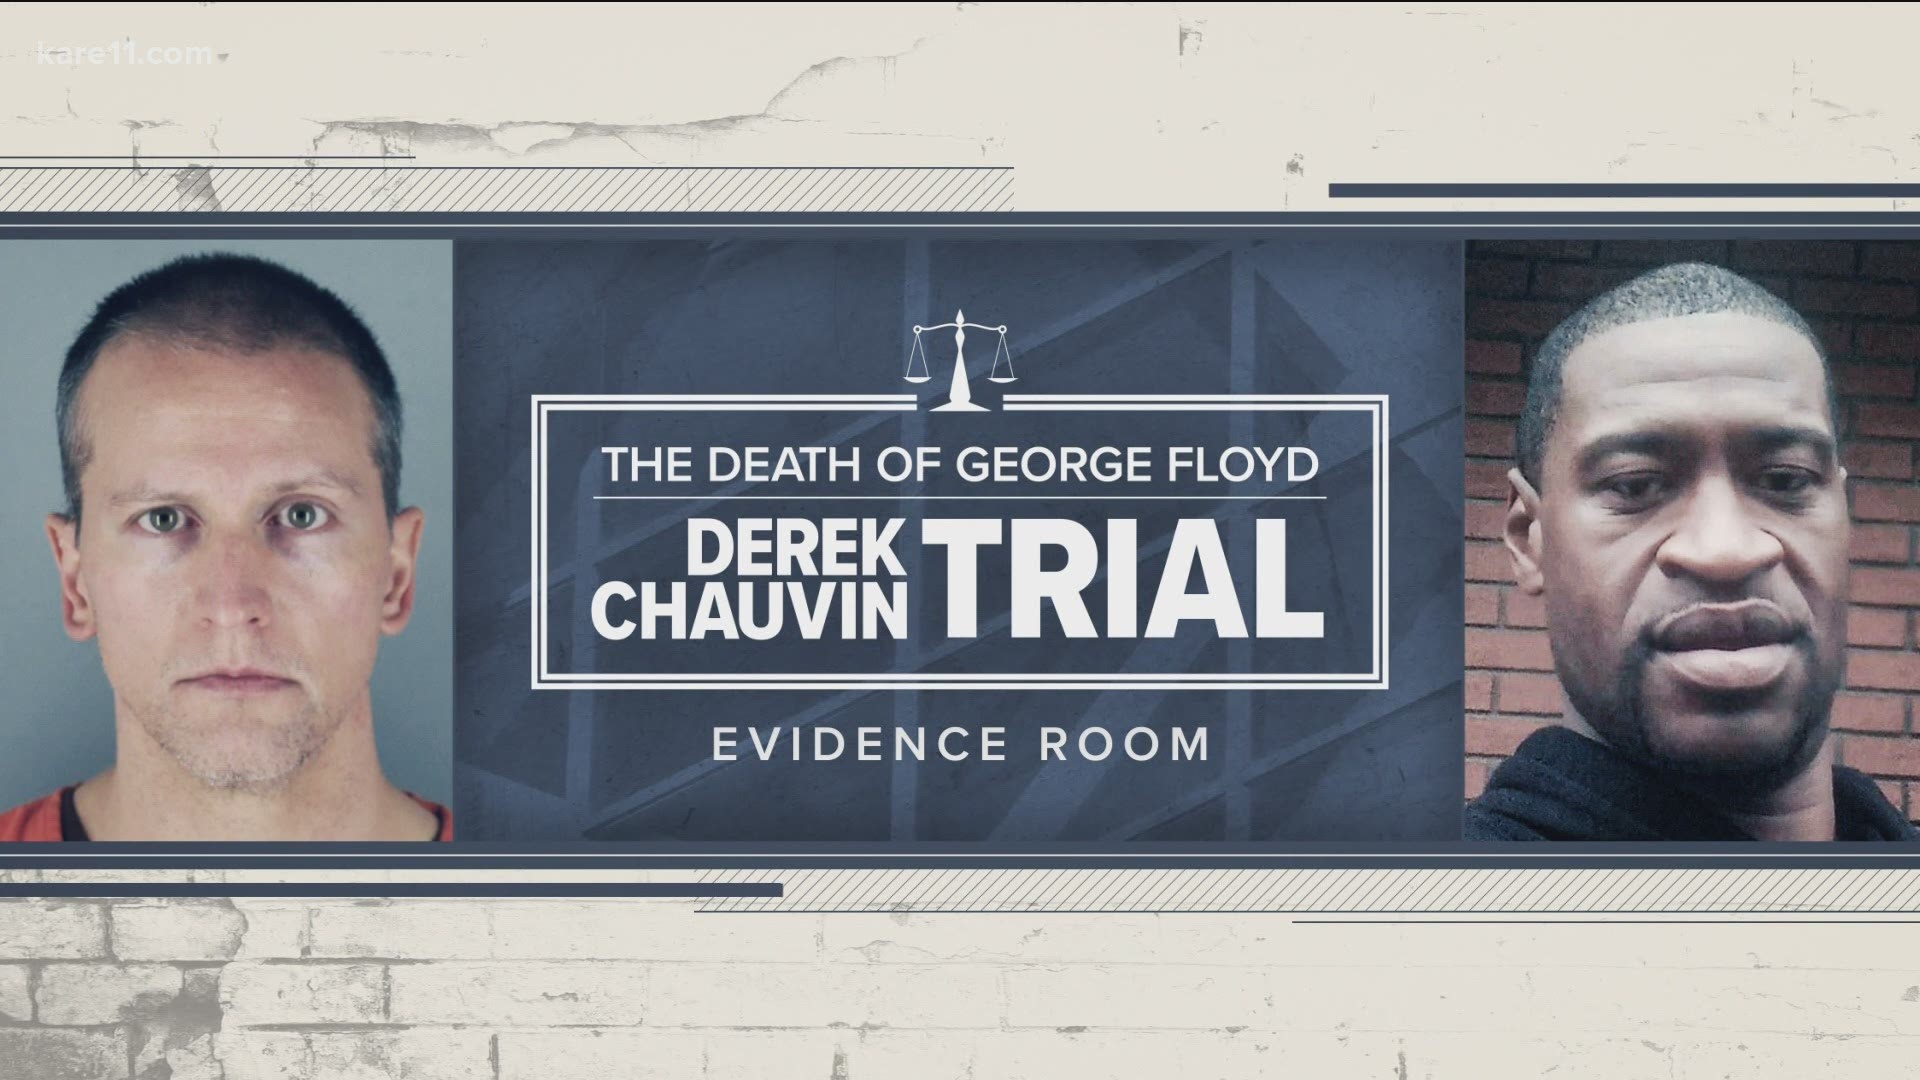 Internal memos documenting Dr. Andrew Baker’s early opinions about George Floyd’s death seem similar to some of the views of Derek Chauvin’s defense expert.